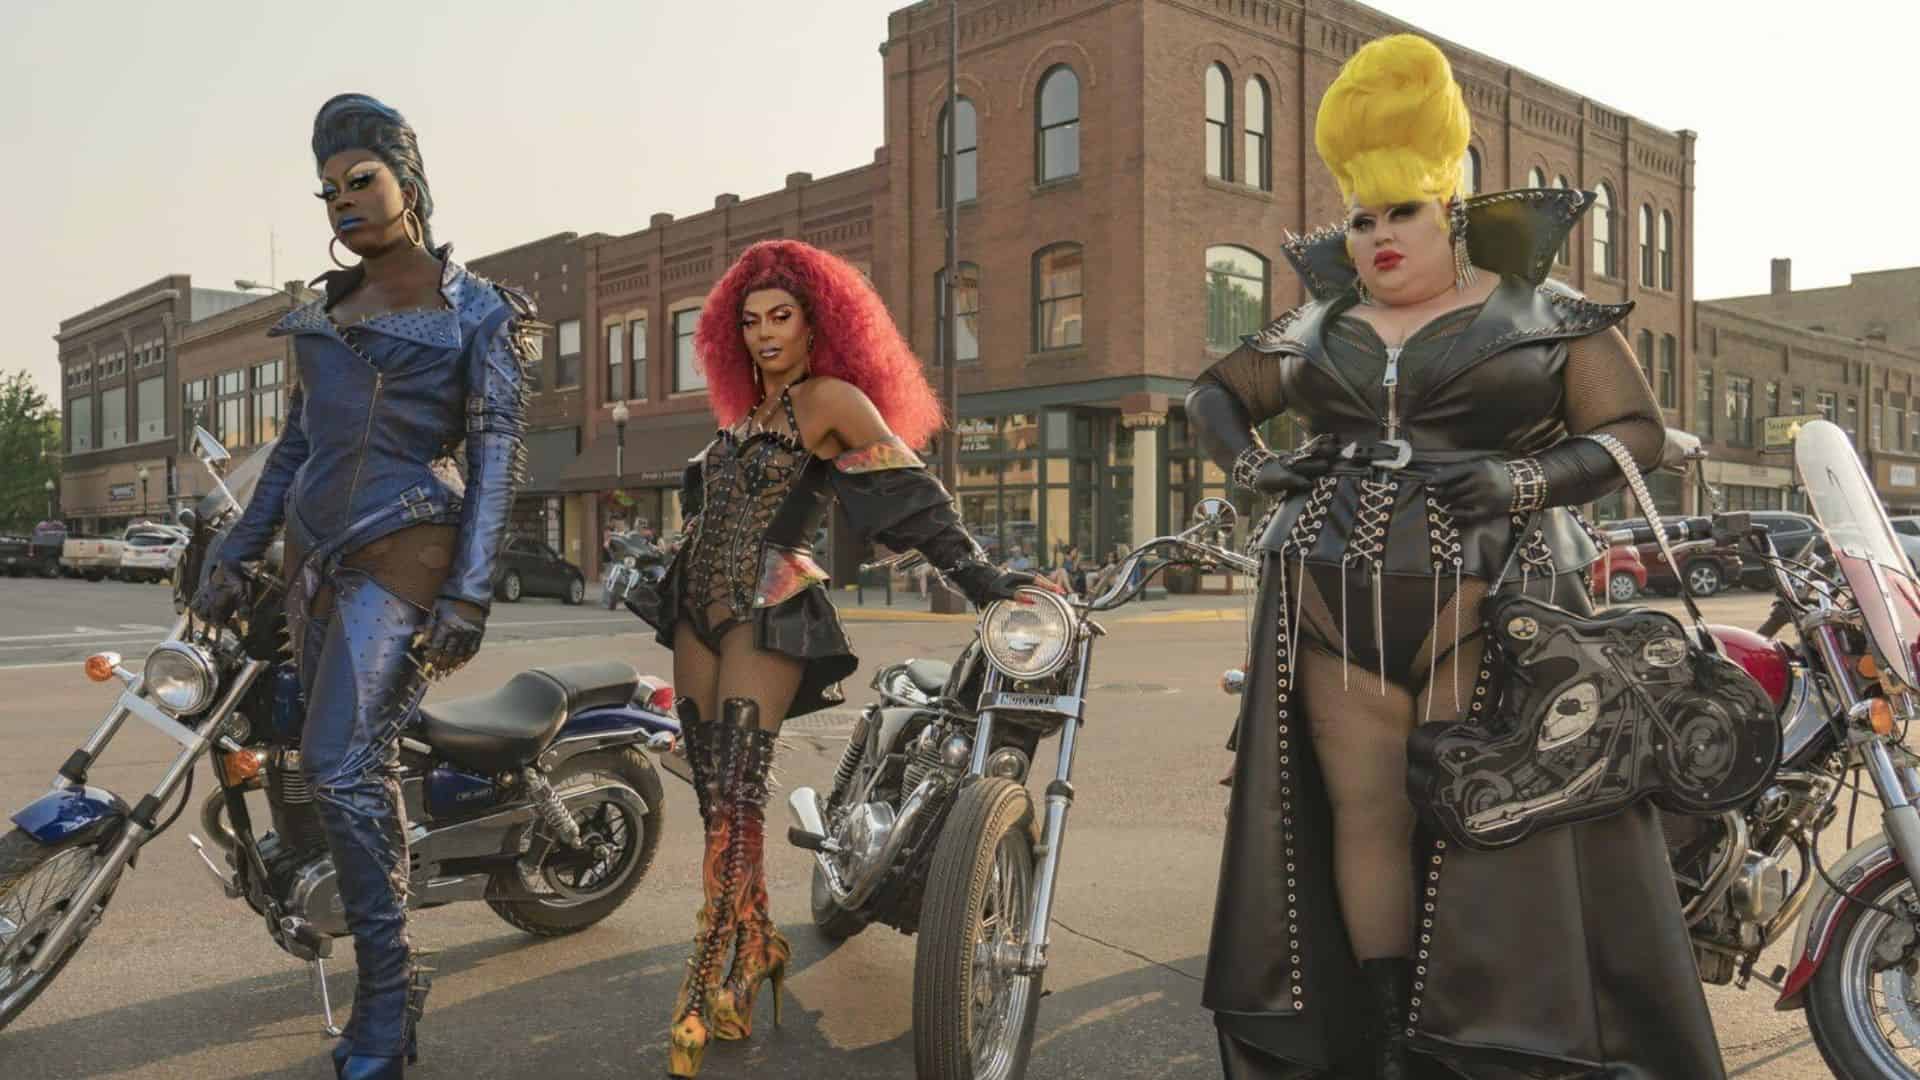 Three drag queens pose with motorcycles in this image from HBO Entertainment.